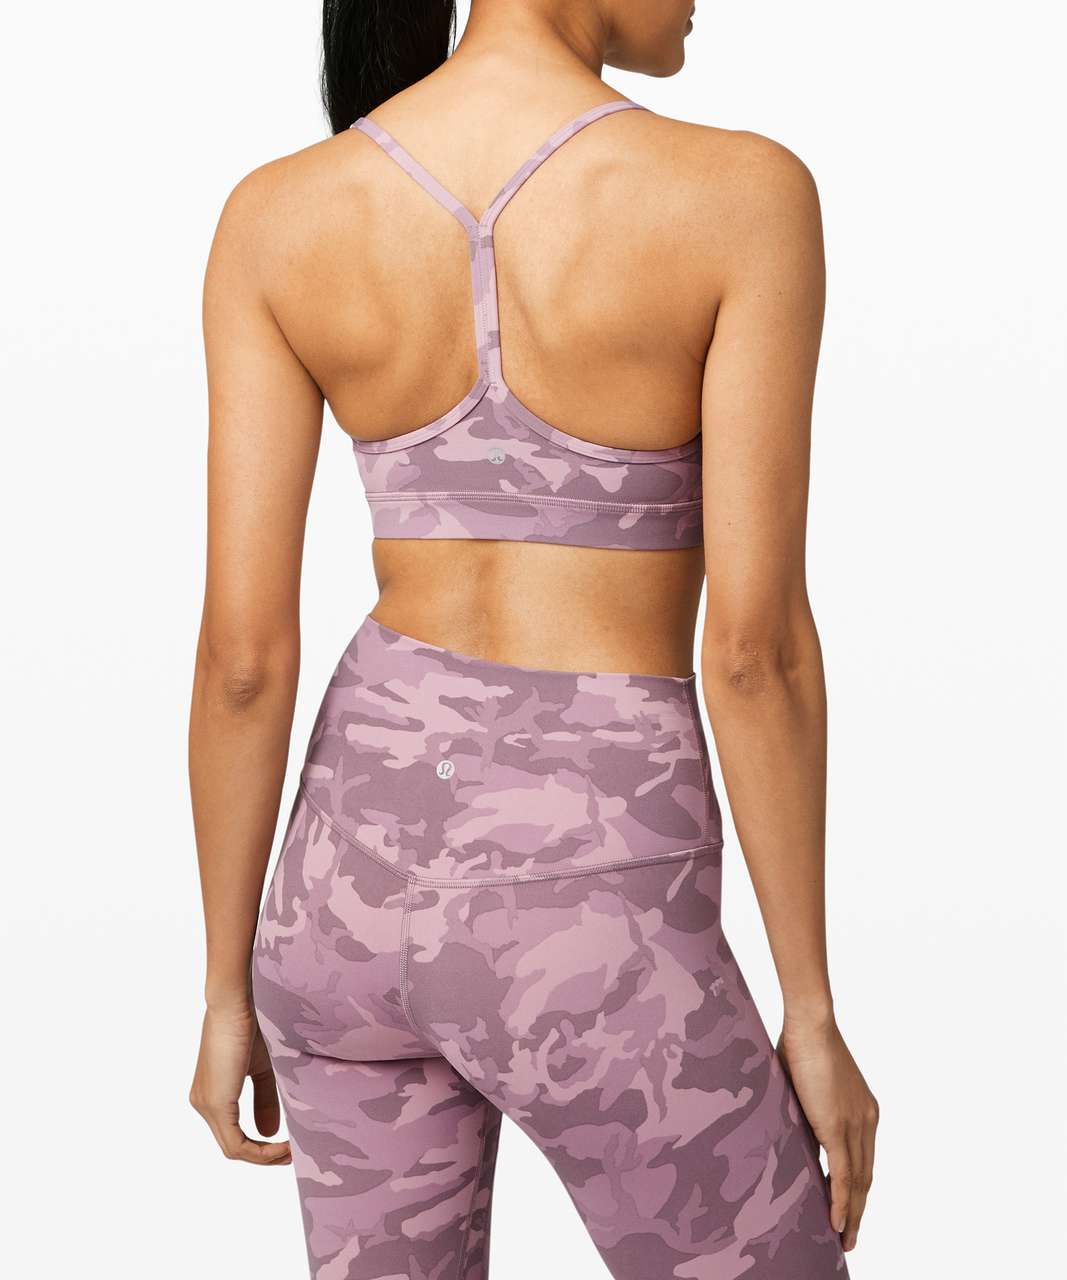 Lululemon Flow Y Bra Nulu *Light Support, B/C Cup - Incognito Camo Pink Taupe Multi